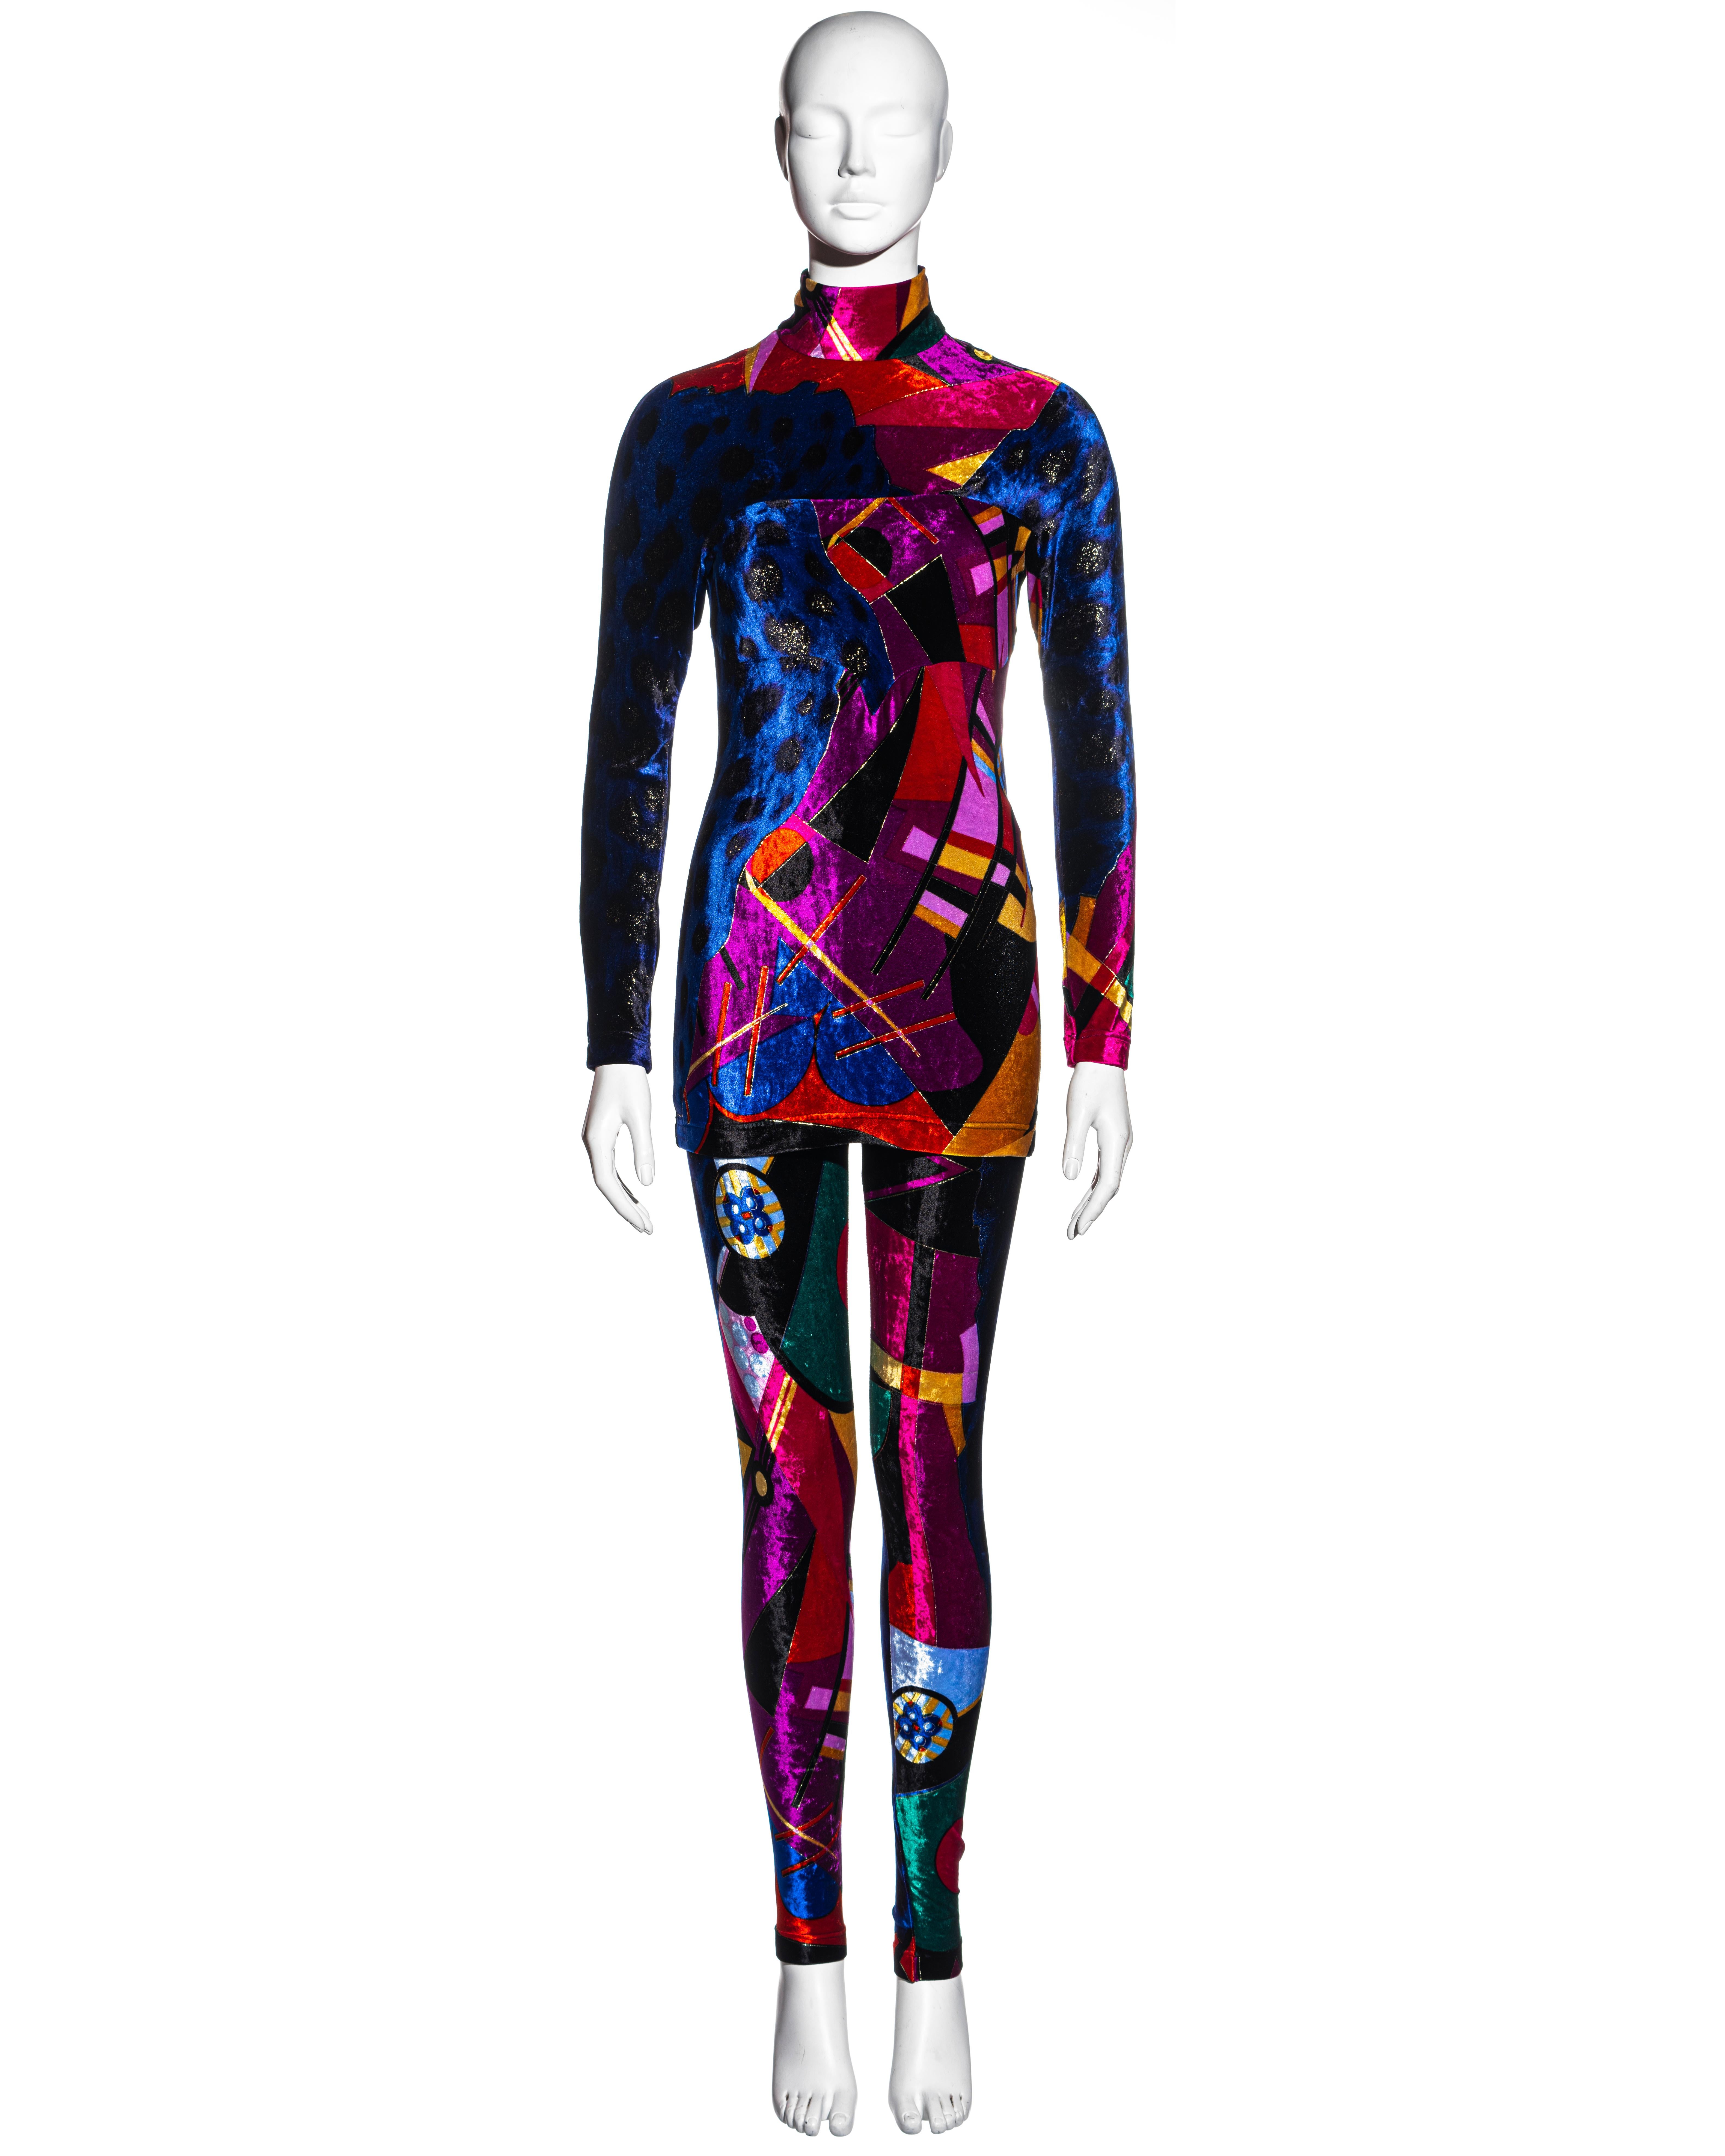 ▪ Gianni Versace multicoloured velvet mini dress and leggings set
▪ All over abstract print in blue, purple, pink, red and gold
▪ Turtle neck mini dress with long sleeves 
▪ High waisted leggings 
▪ Skin tight fit 
▪ Concealed zippers 
▪ IT 42 - FR